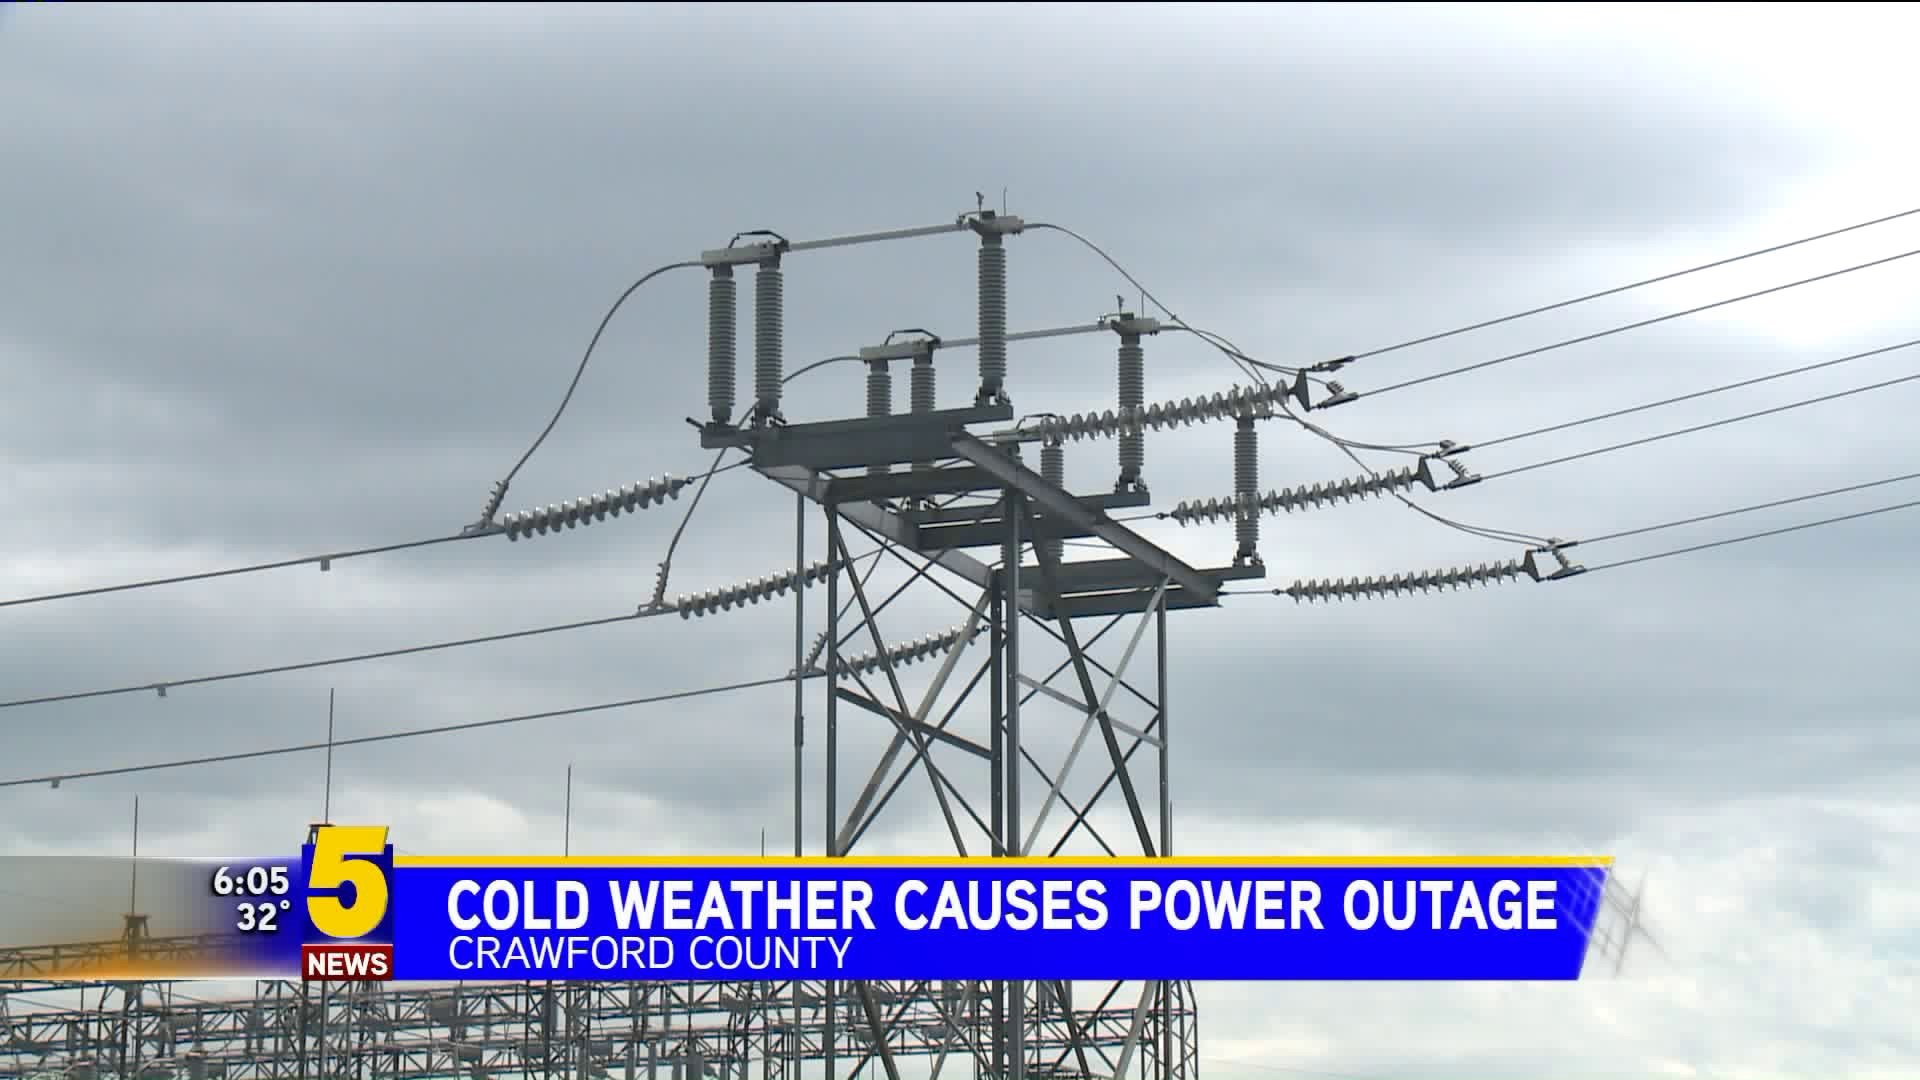 Cold Weather Causes Power Outage